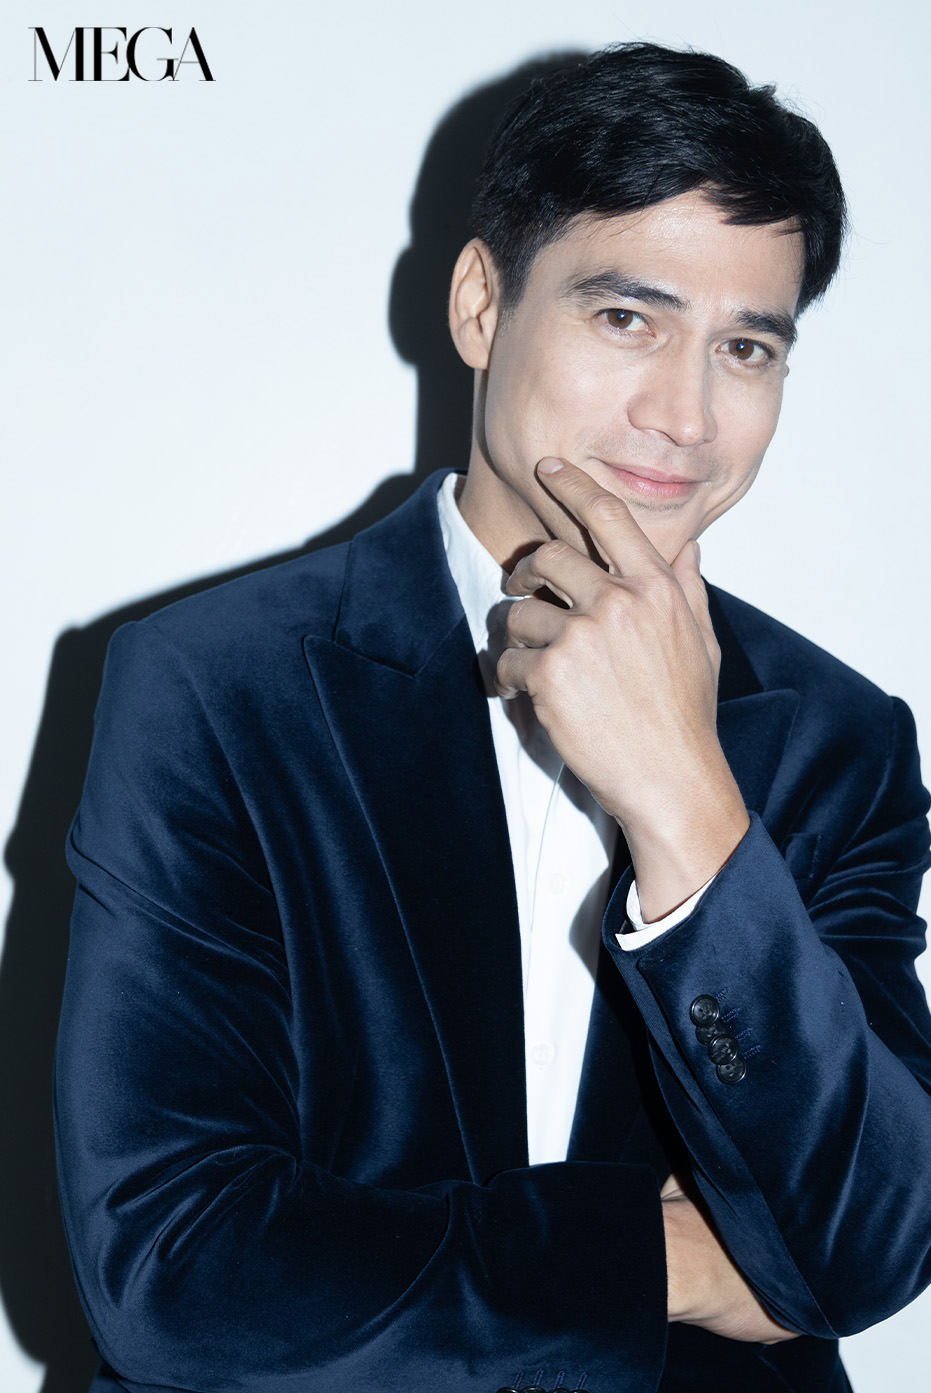 Piolo Pascual posing for a photo wearing a navy velvet suit.